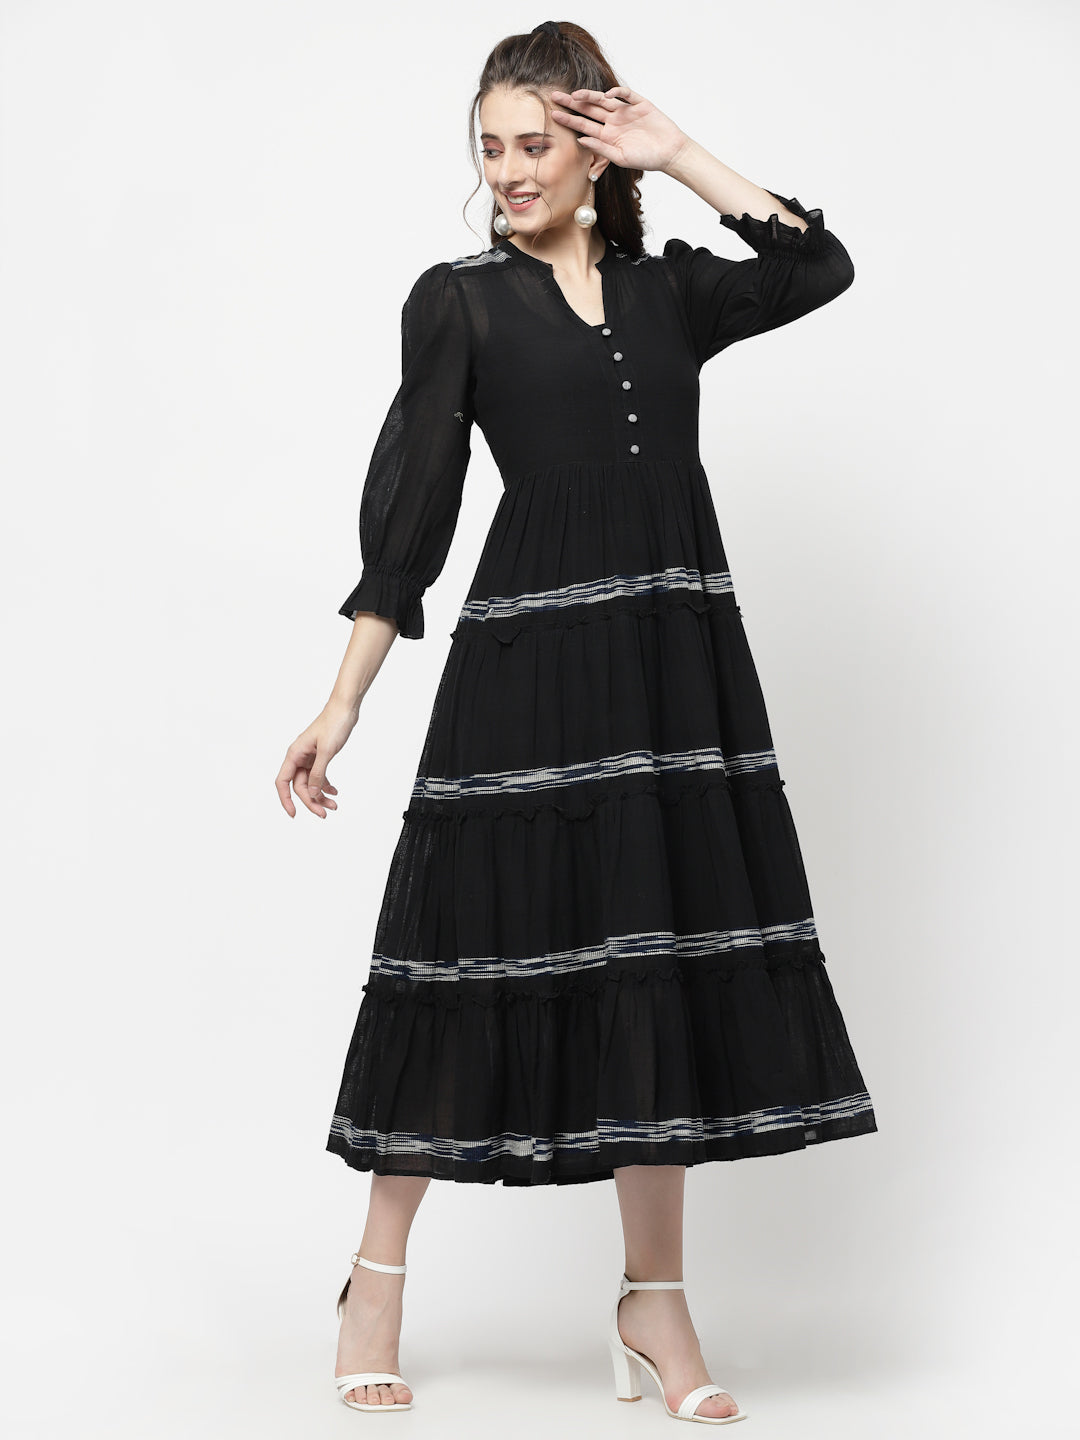 Terquois Black Dobby Two Layered Casual Dress With Collar-Neck Dresses TERQUOIS   